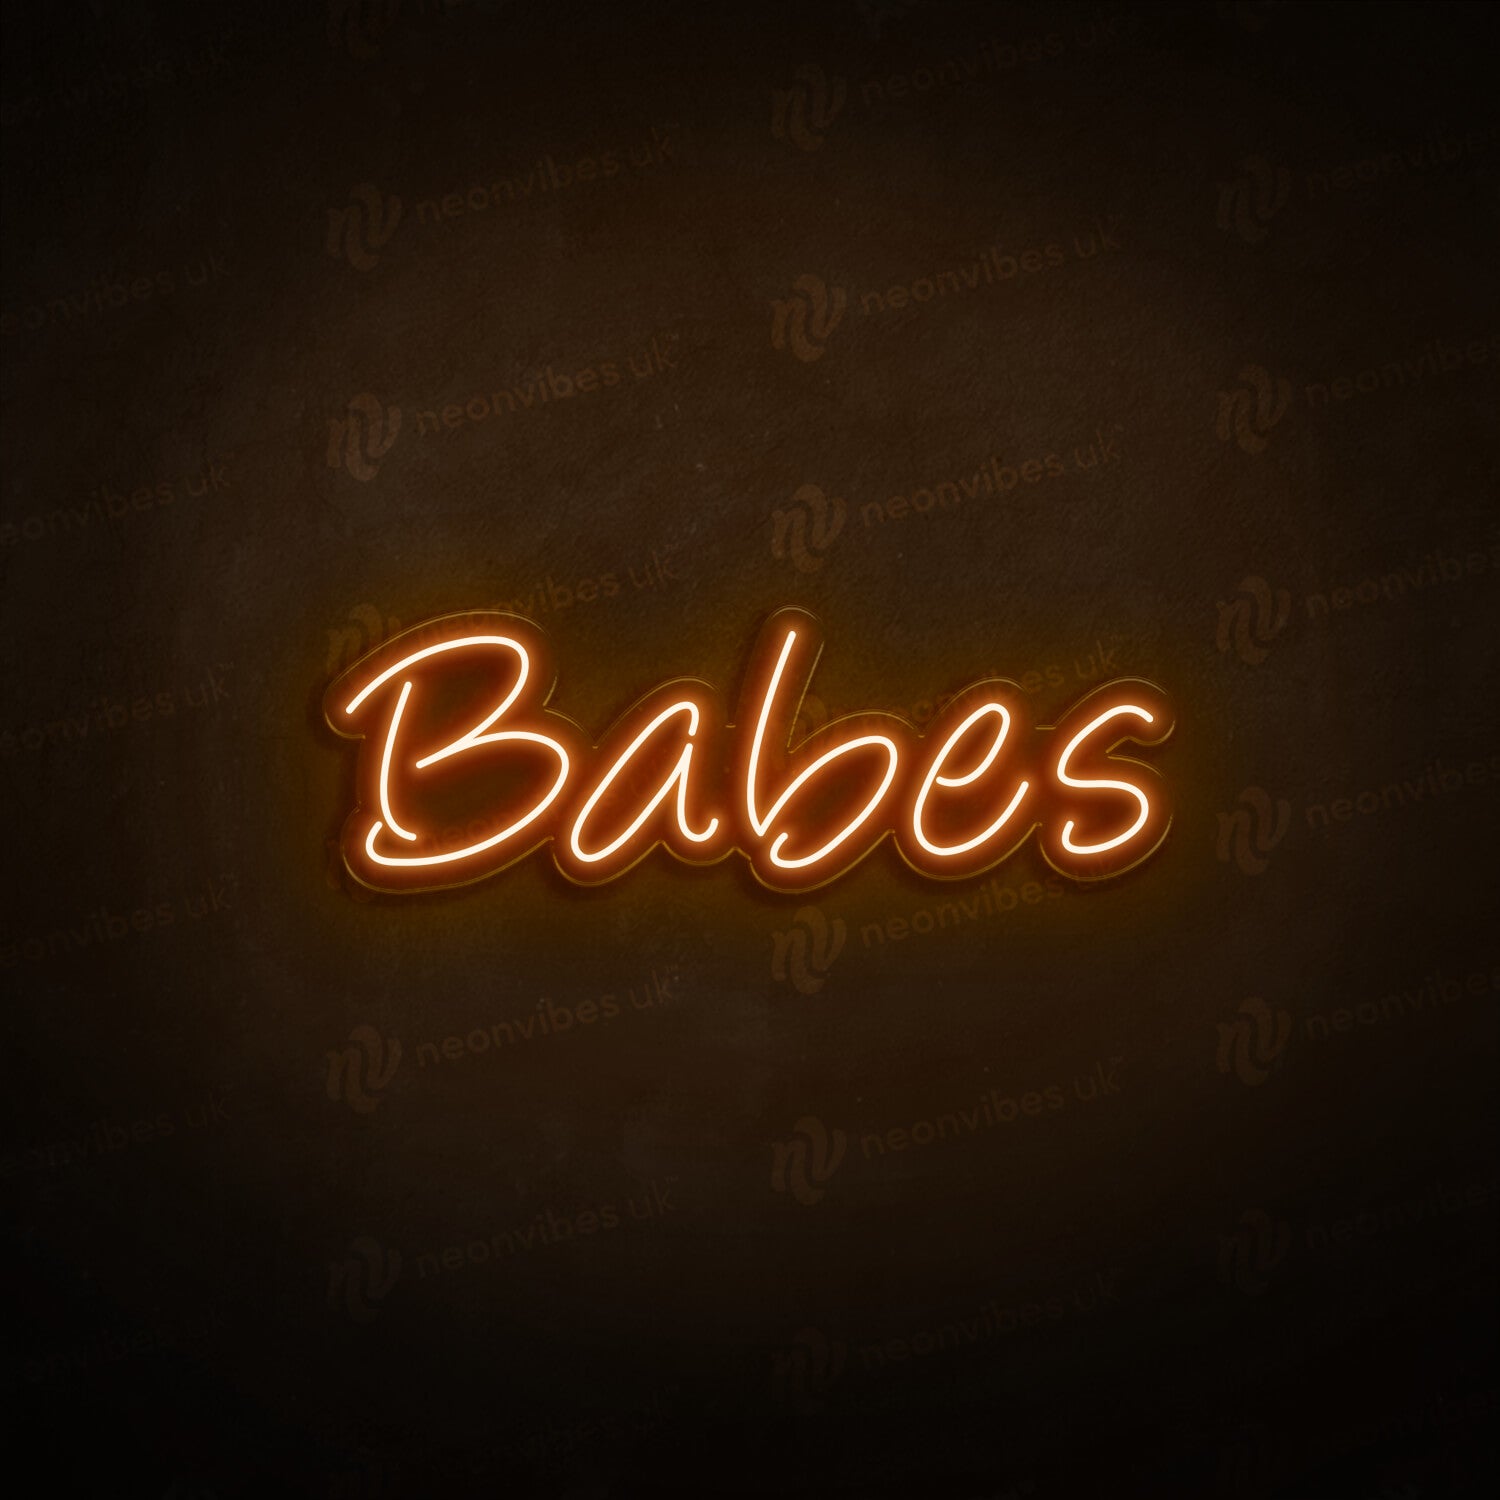 Babes neon sign